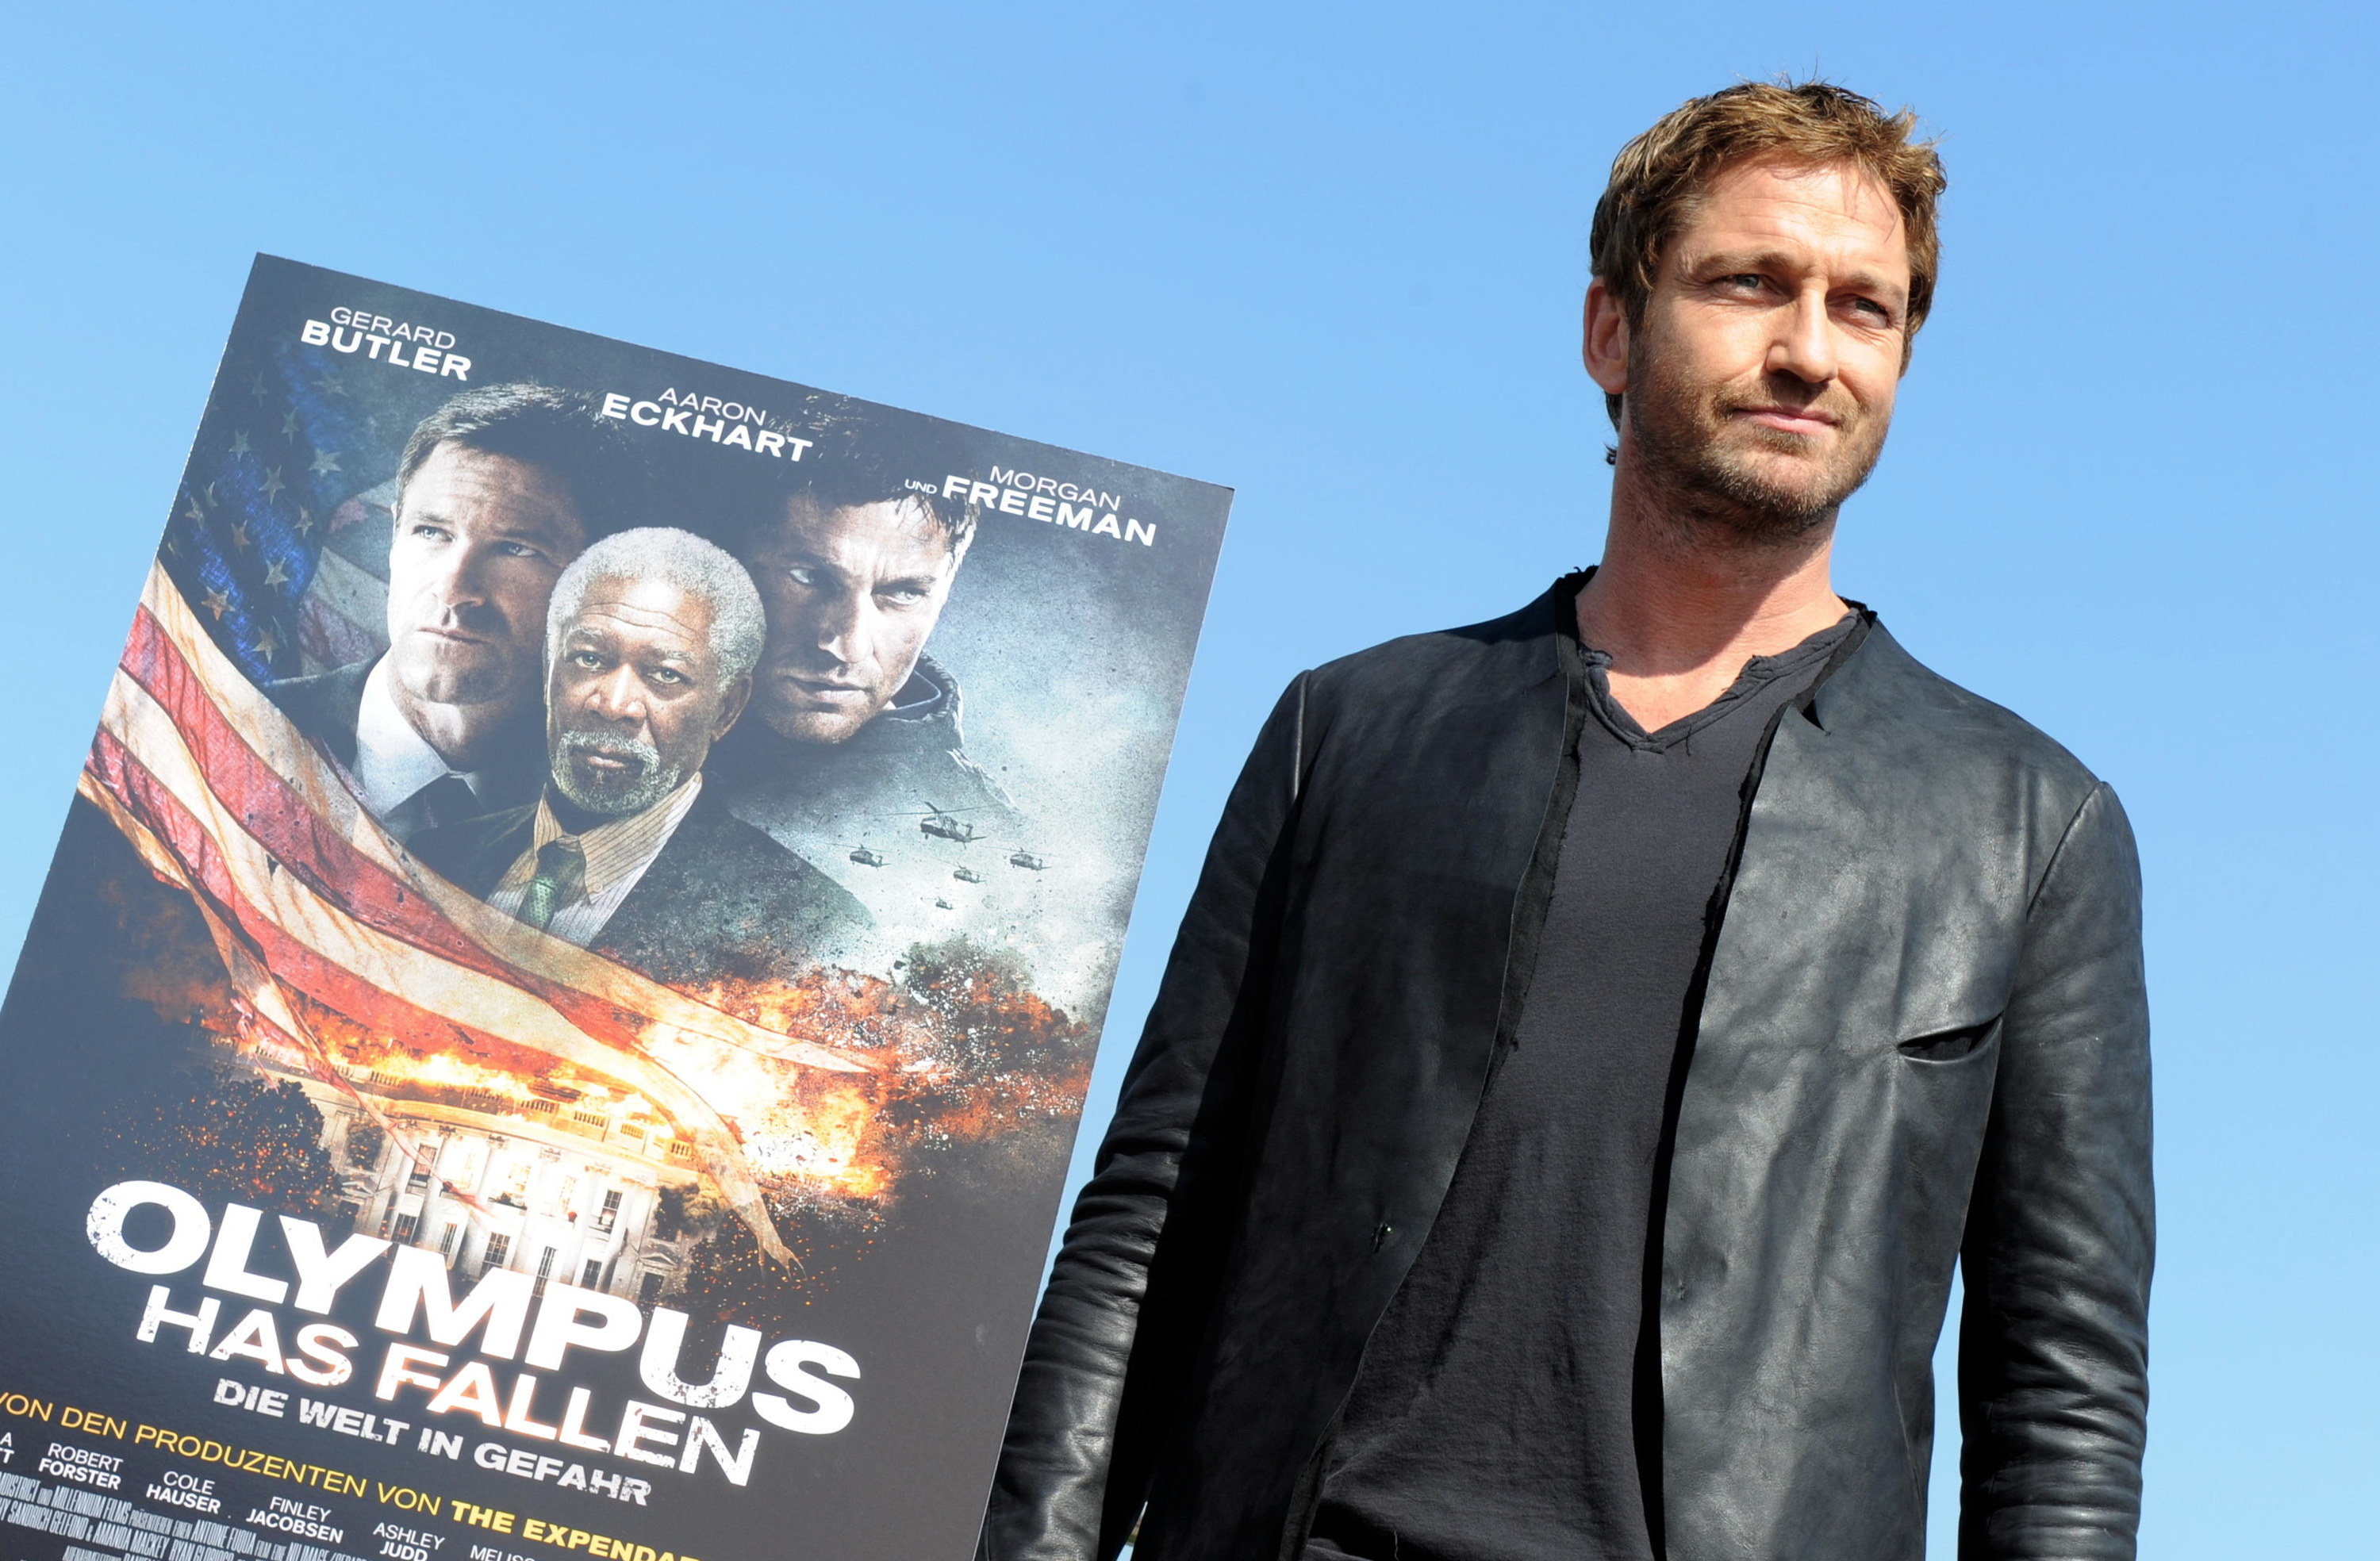 British actor Gerard Butler poses for the camera at a photocall for his new film &#x27;Olympus Has Fallen&#x27; in Munich, Germany